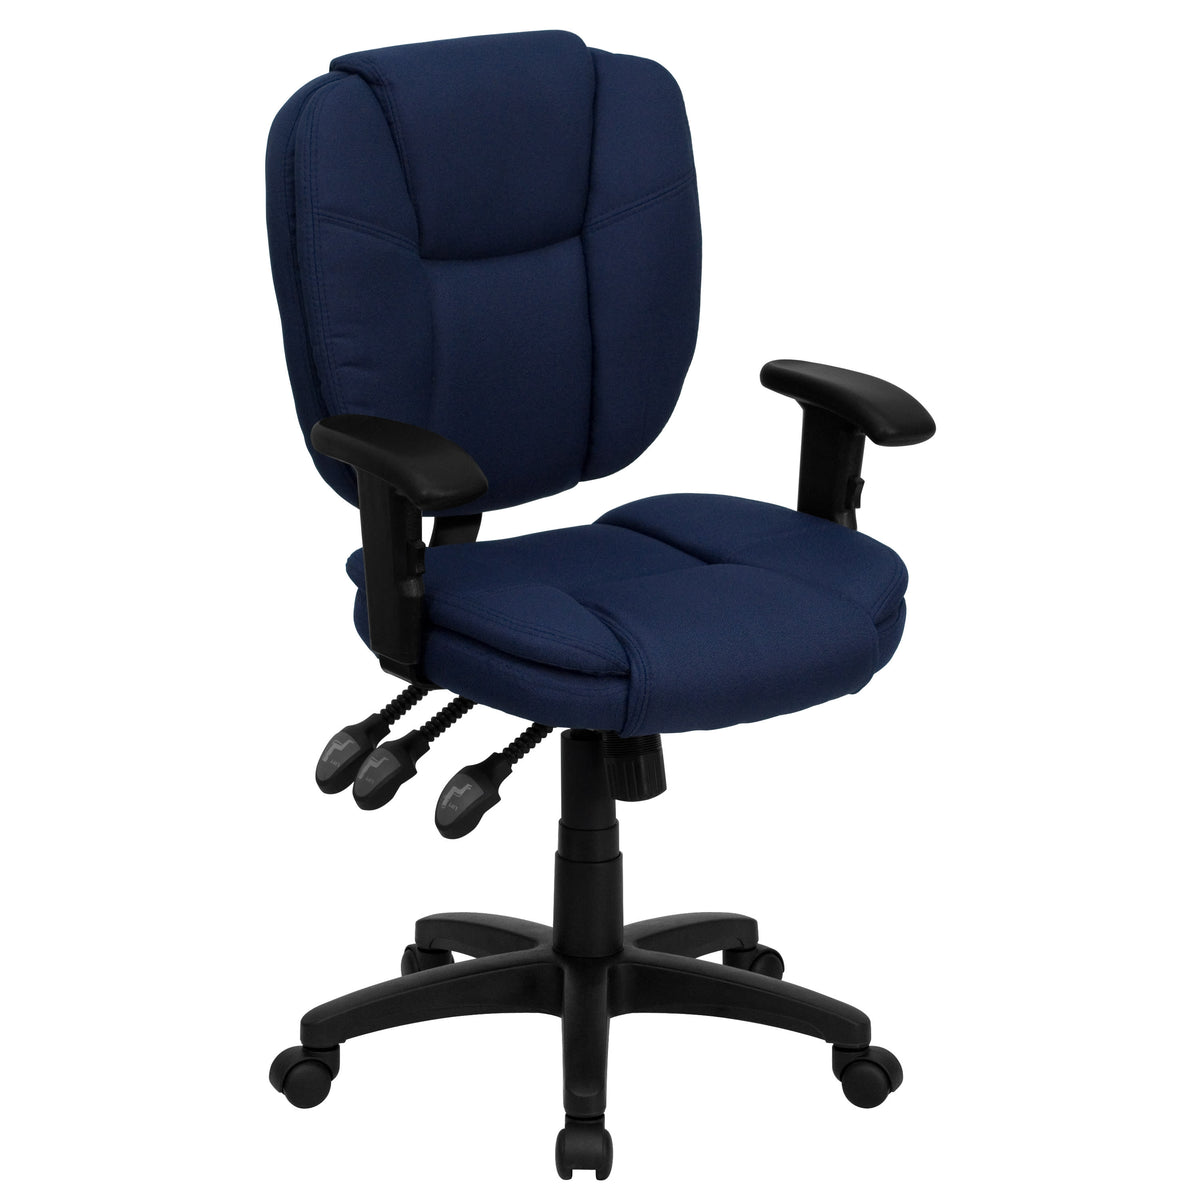 Navy Blue Fabric |#| Mid-Back Navy Blue Fabric Multifunction Office Chair with Pillow Top Cushioning